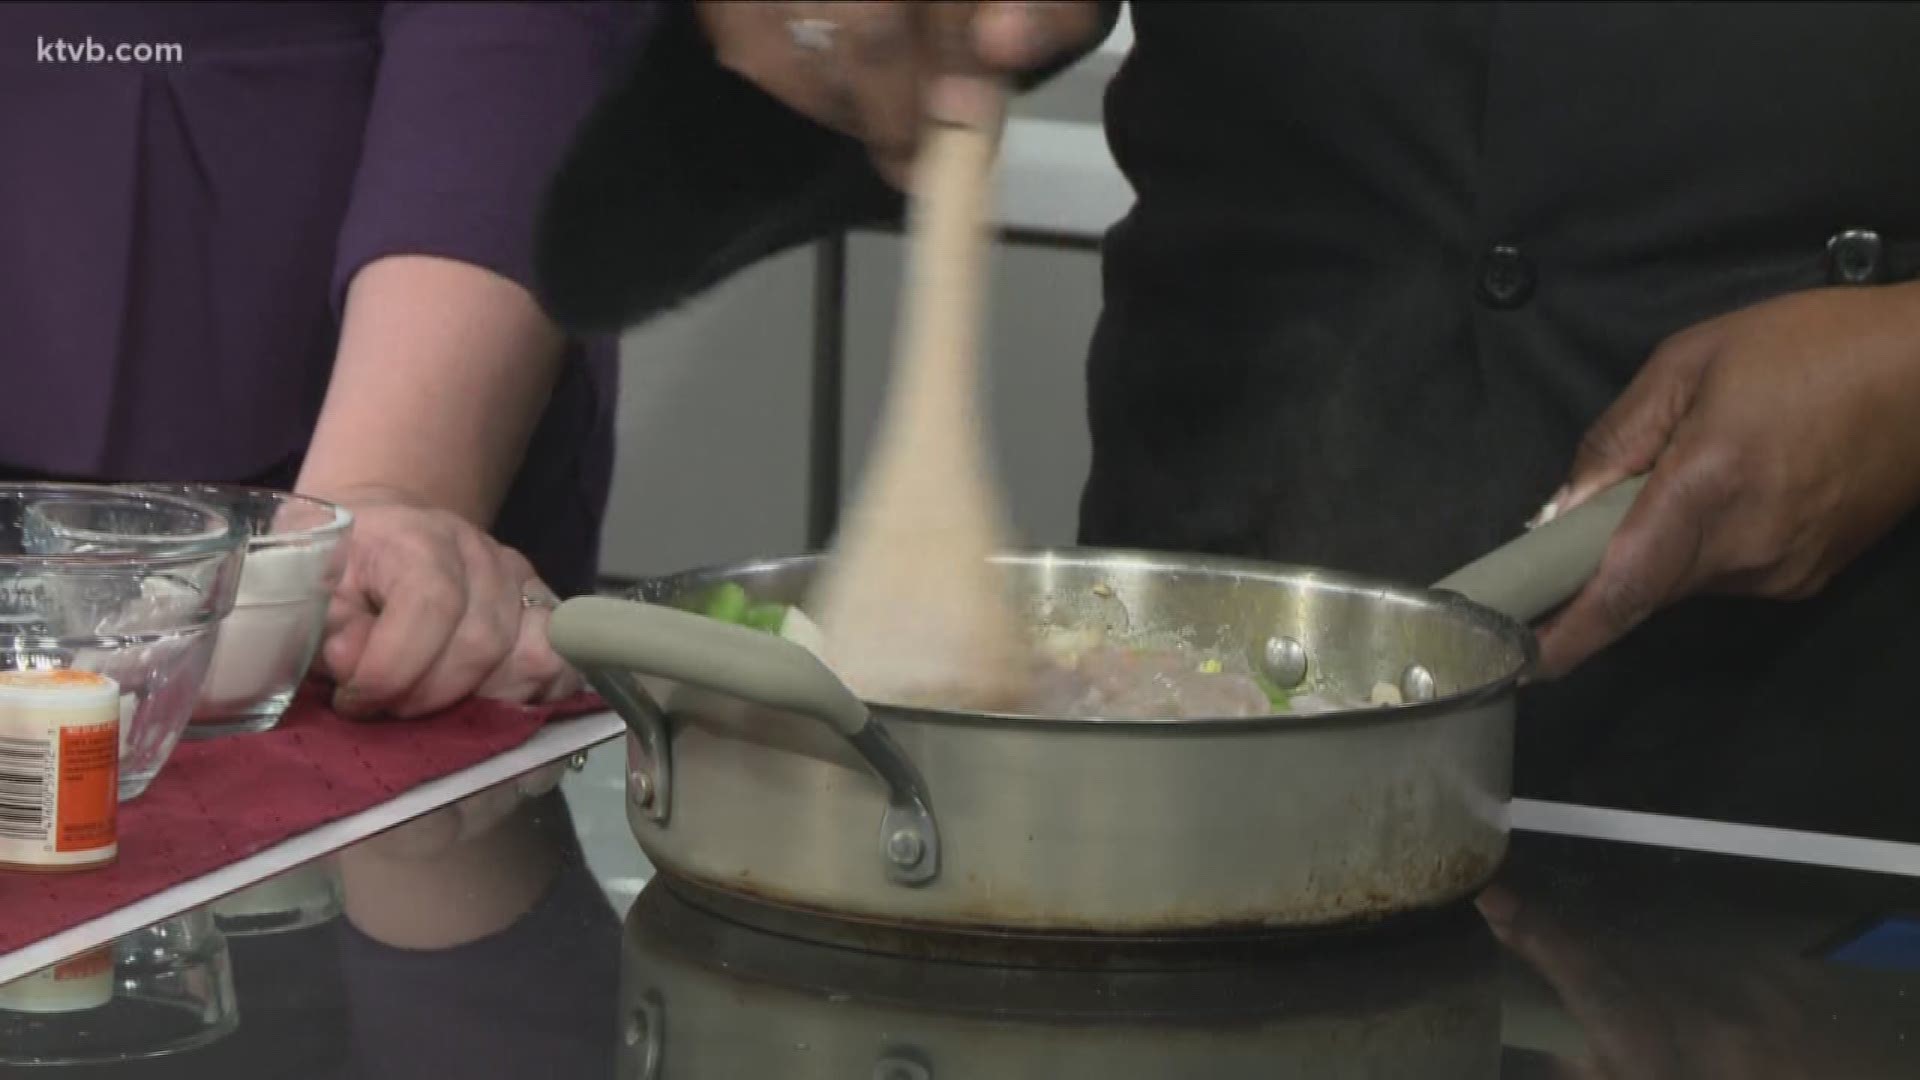 Chef Yvonne Anderson-Thomas gives us a soul food lesson and show us how to make cajun shrimp and grits.